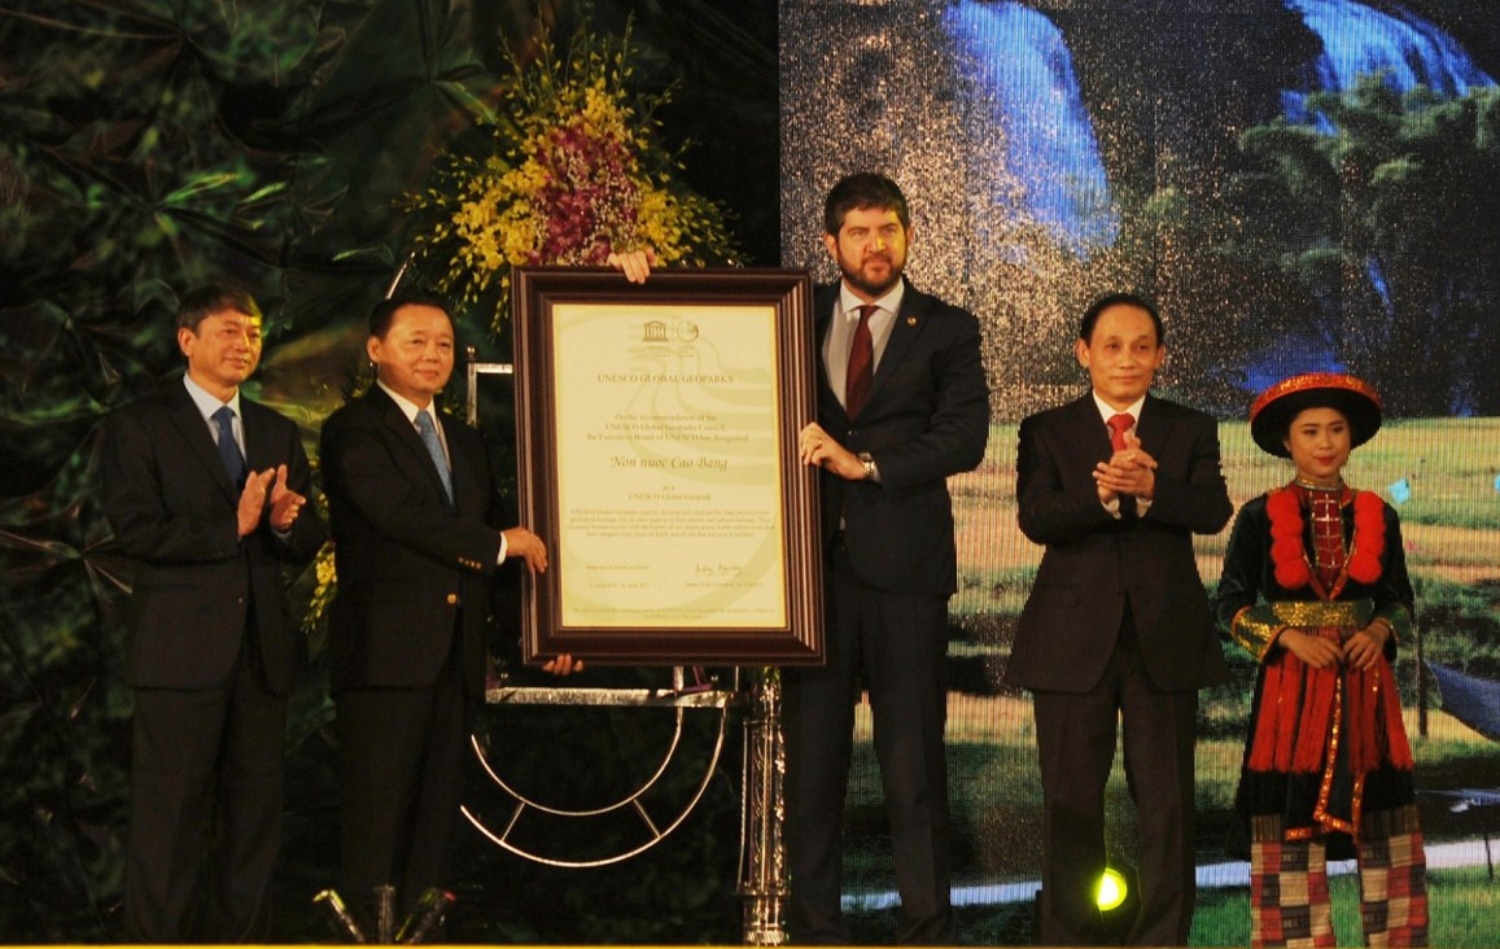 CEREMONY ON THE RECEIVING OF NON NUOC CAO BANG UNESCO GLOBAL GEOPARK CERTIFICATE